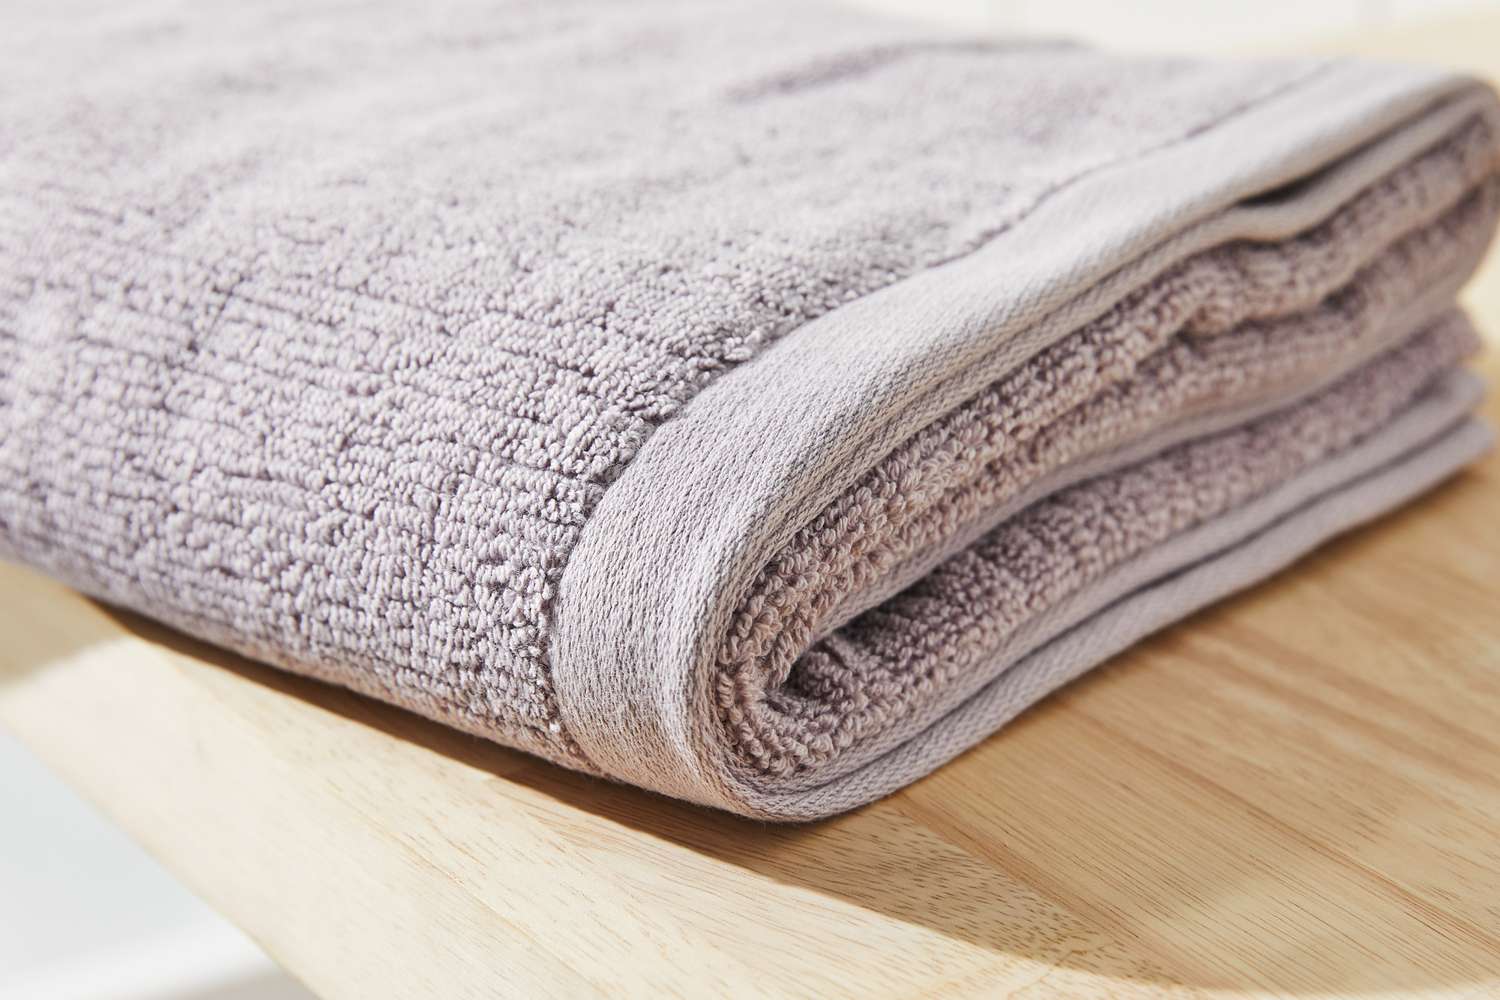 West Elm Everyday Textured Organic Towels on bathroom counter